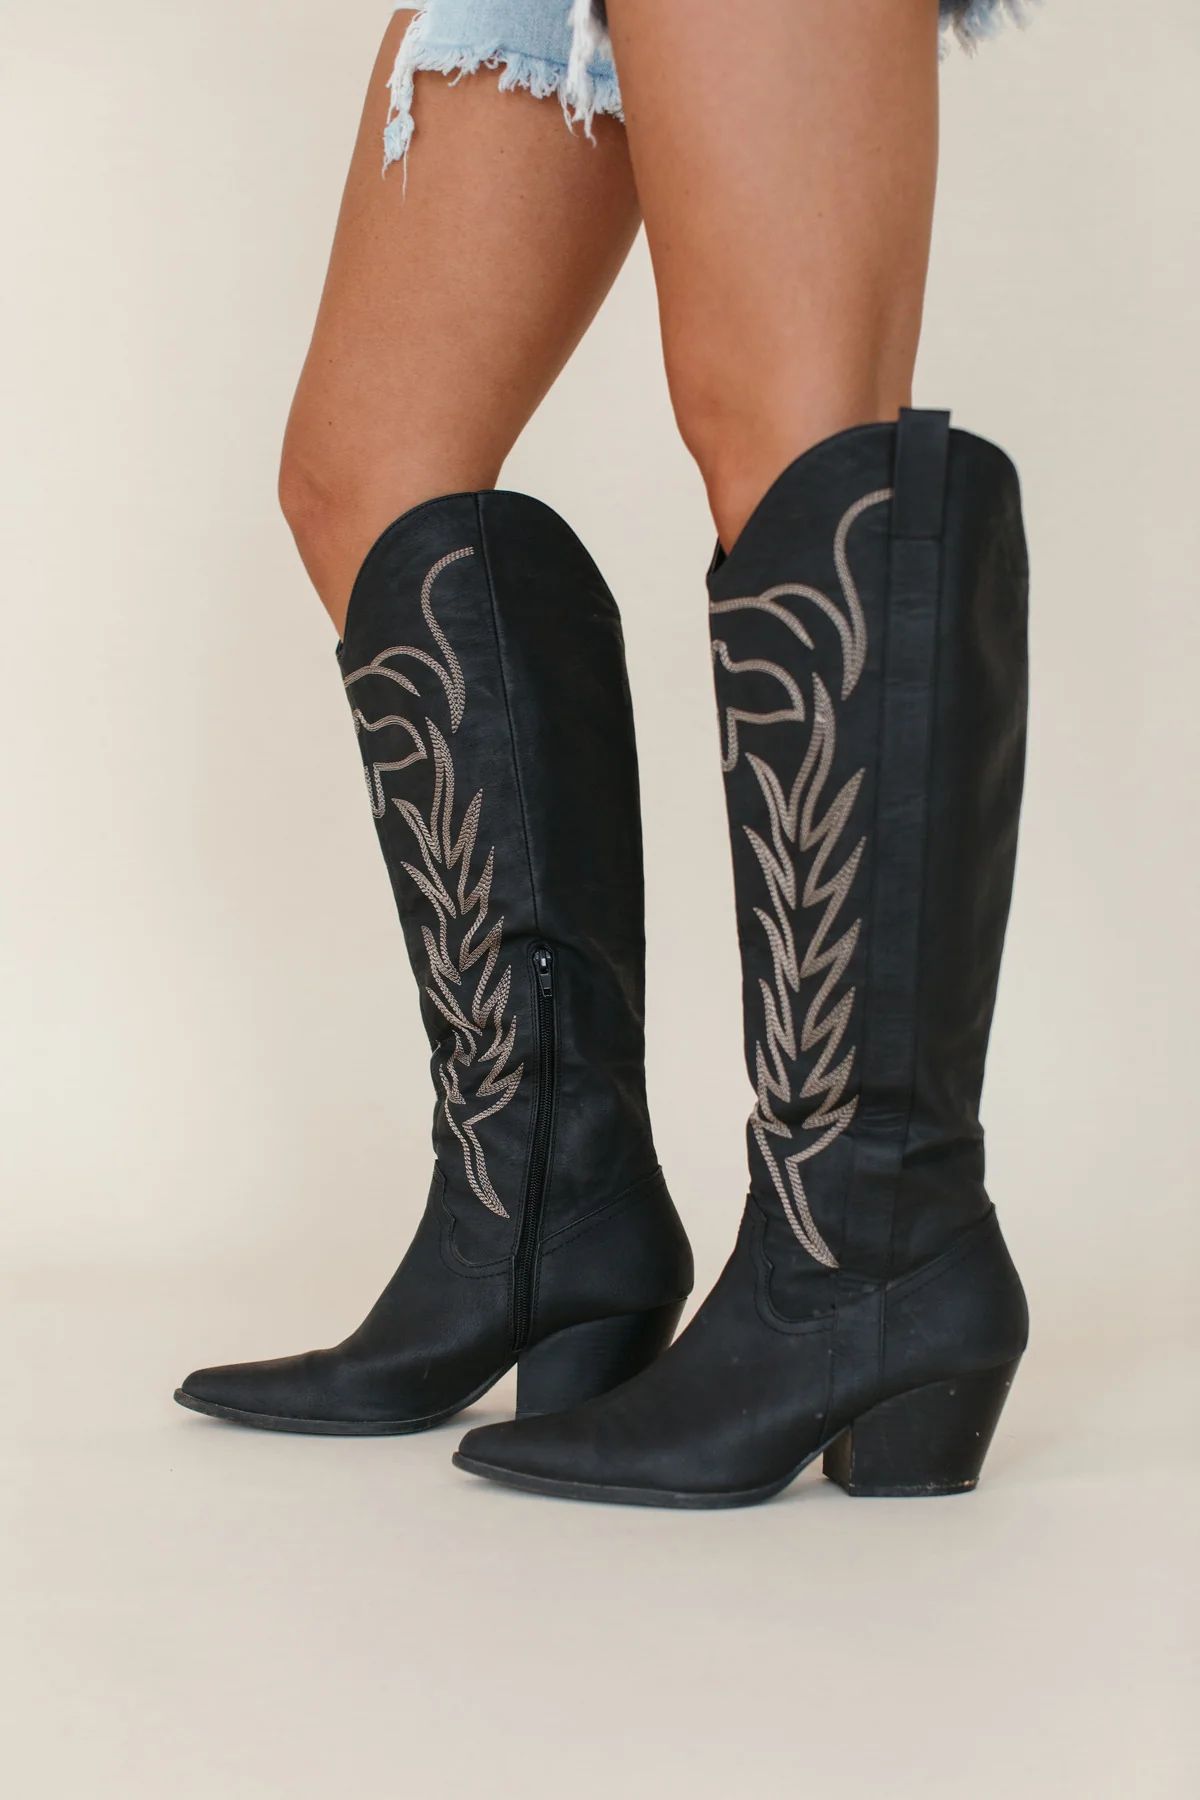 Postie Western Black Boots | The Post